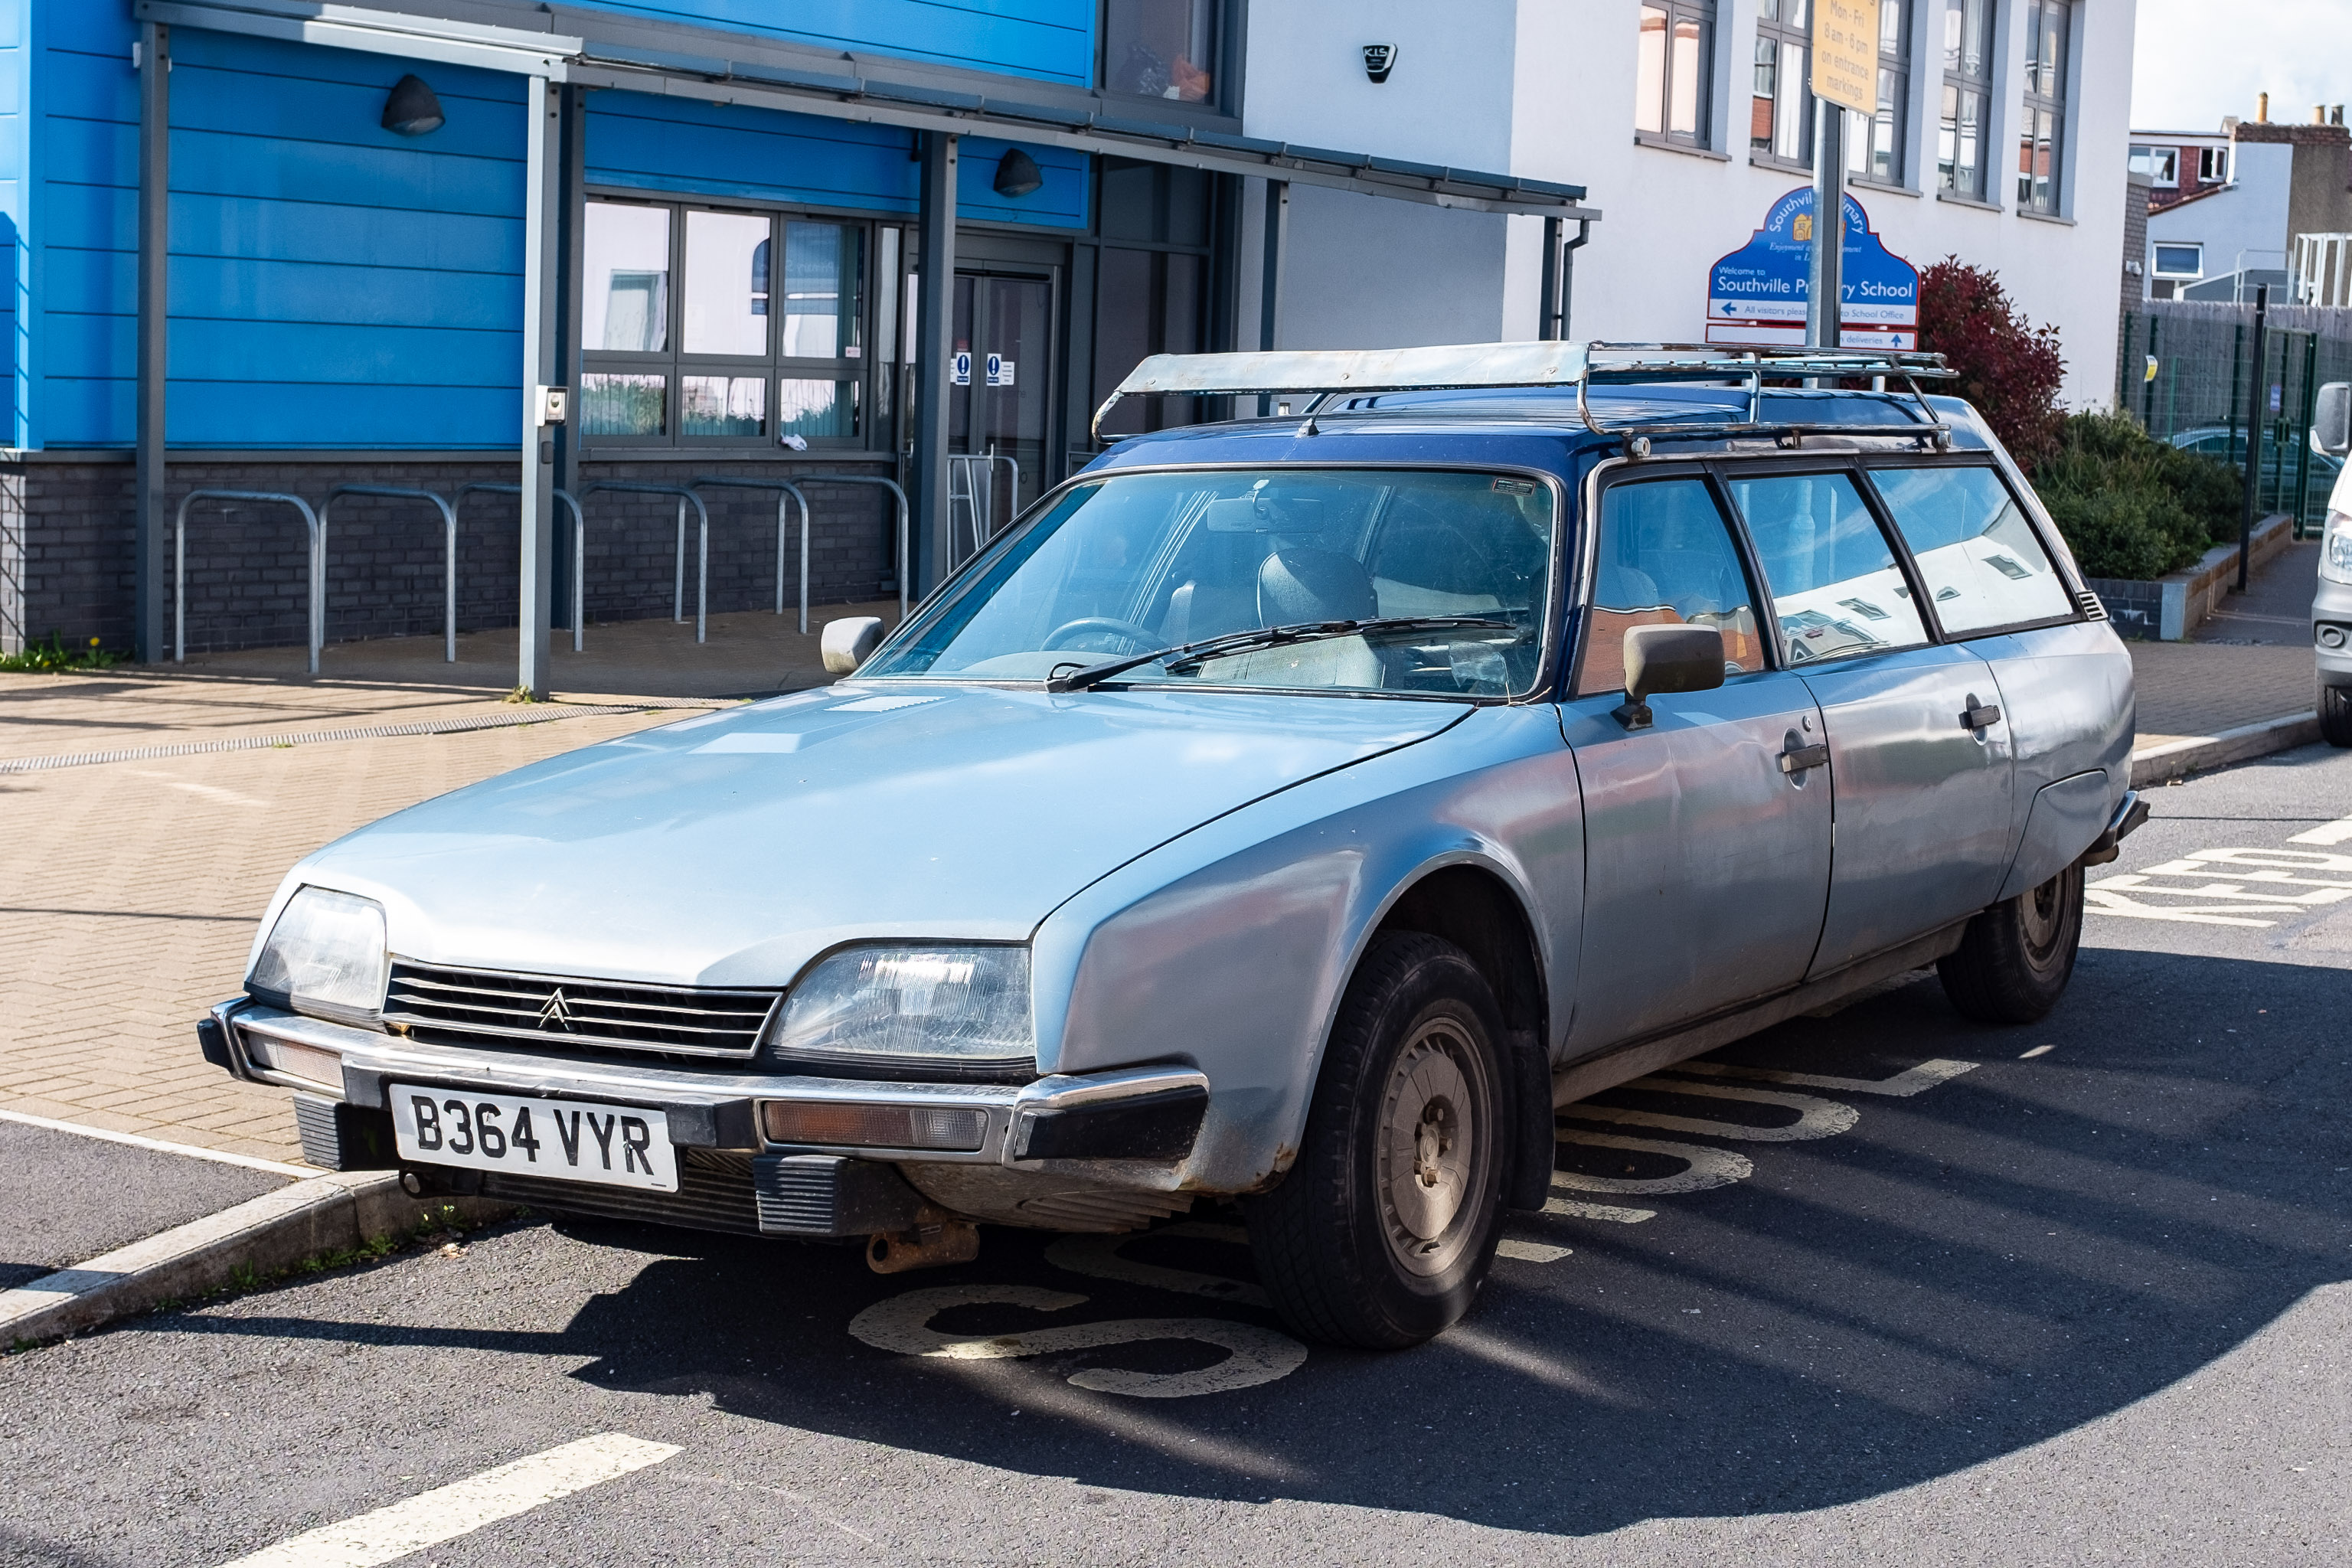 Citroen CX-3 Estate
Lisa has apparently travelled in a (full up) Familiale seven-seater variant on a very long trip across Europe, and did not enjoy the experience muc...